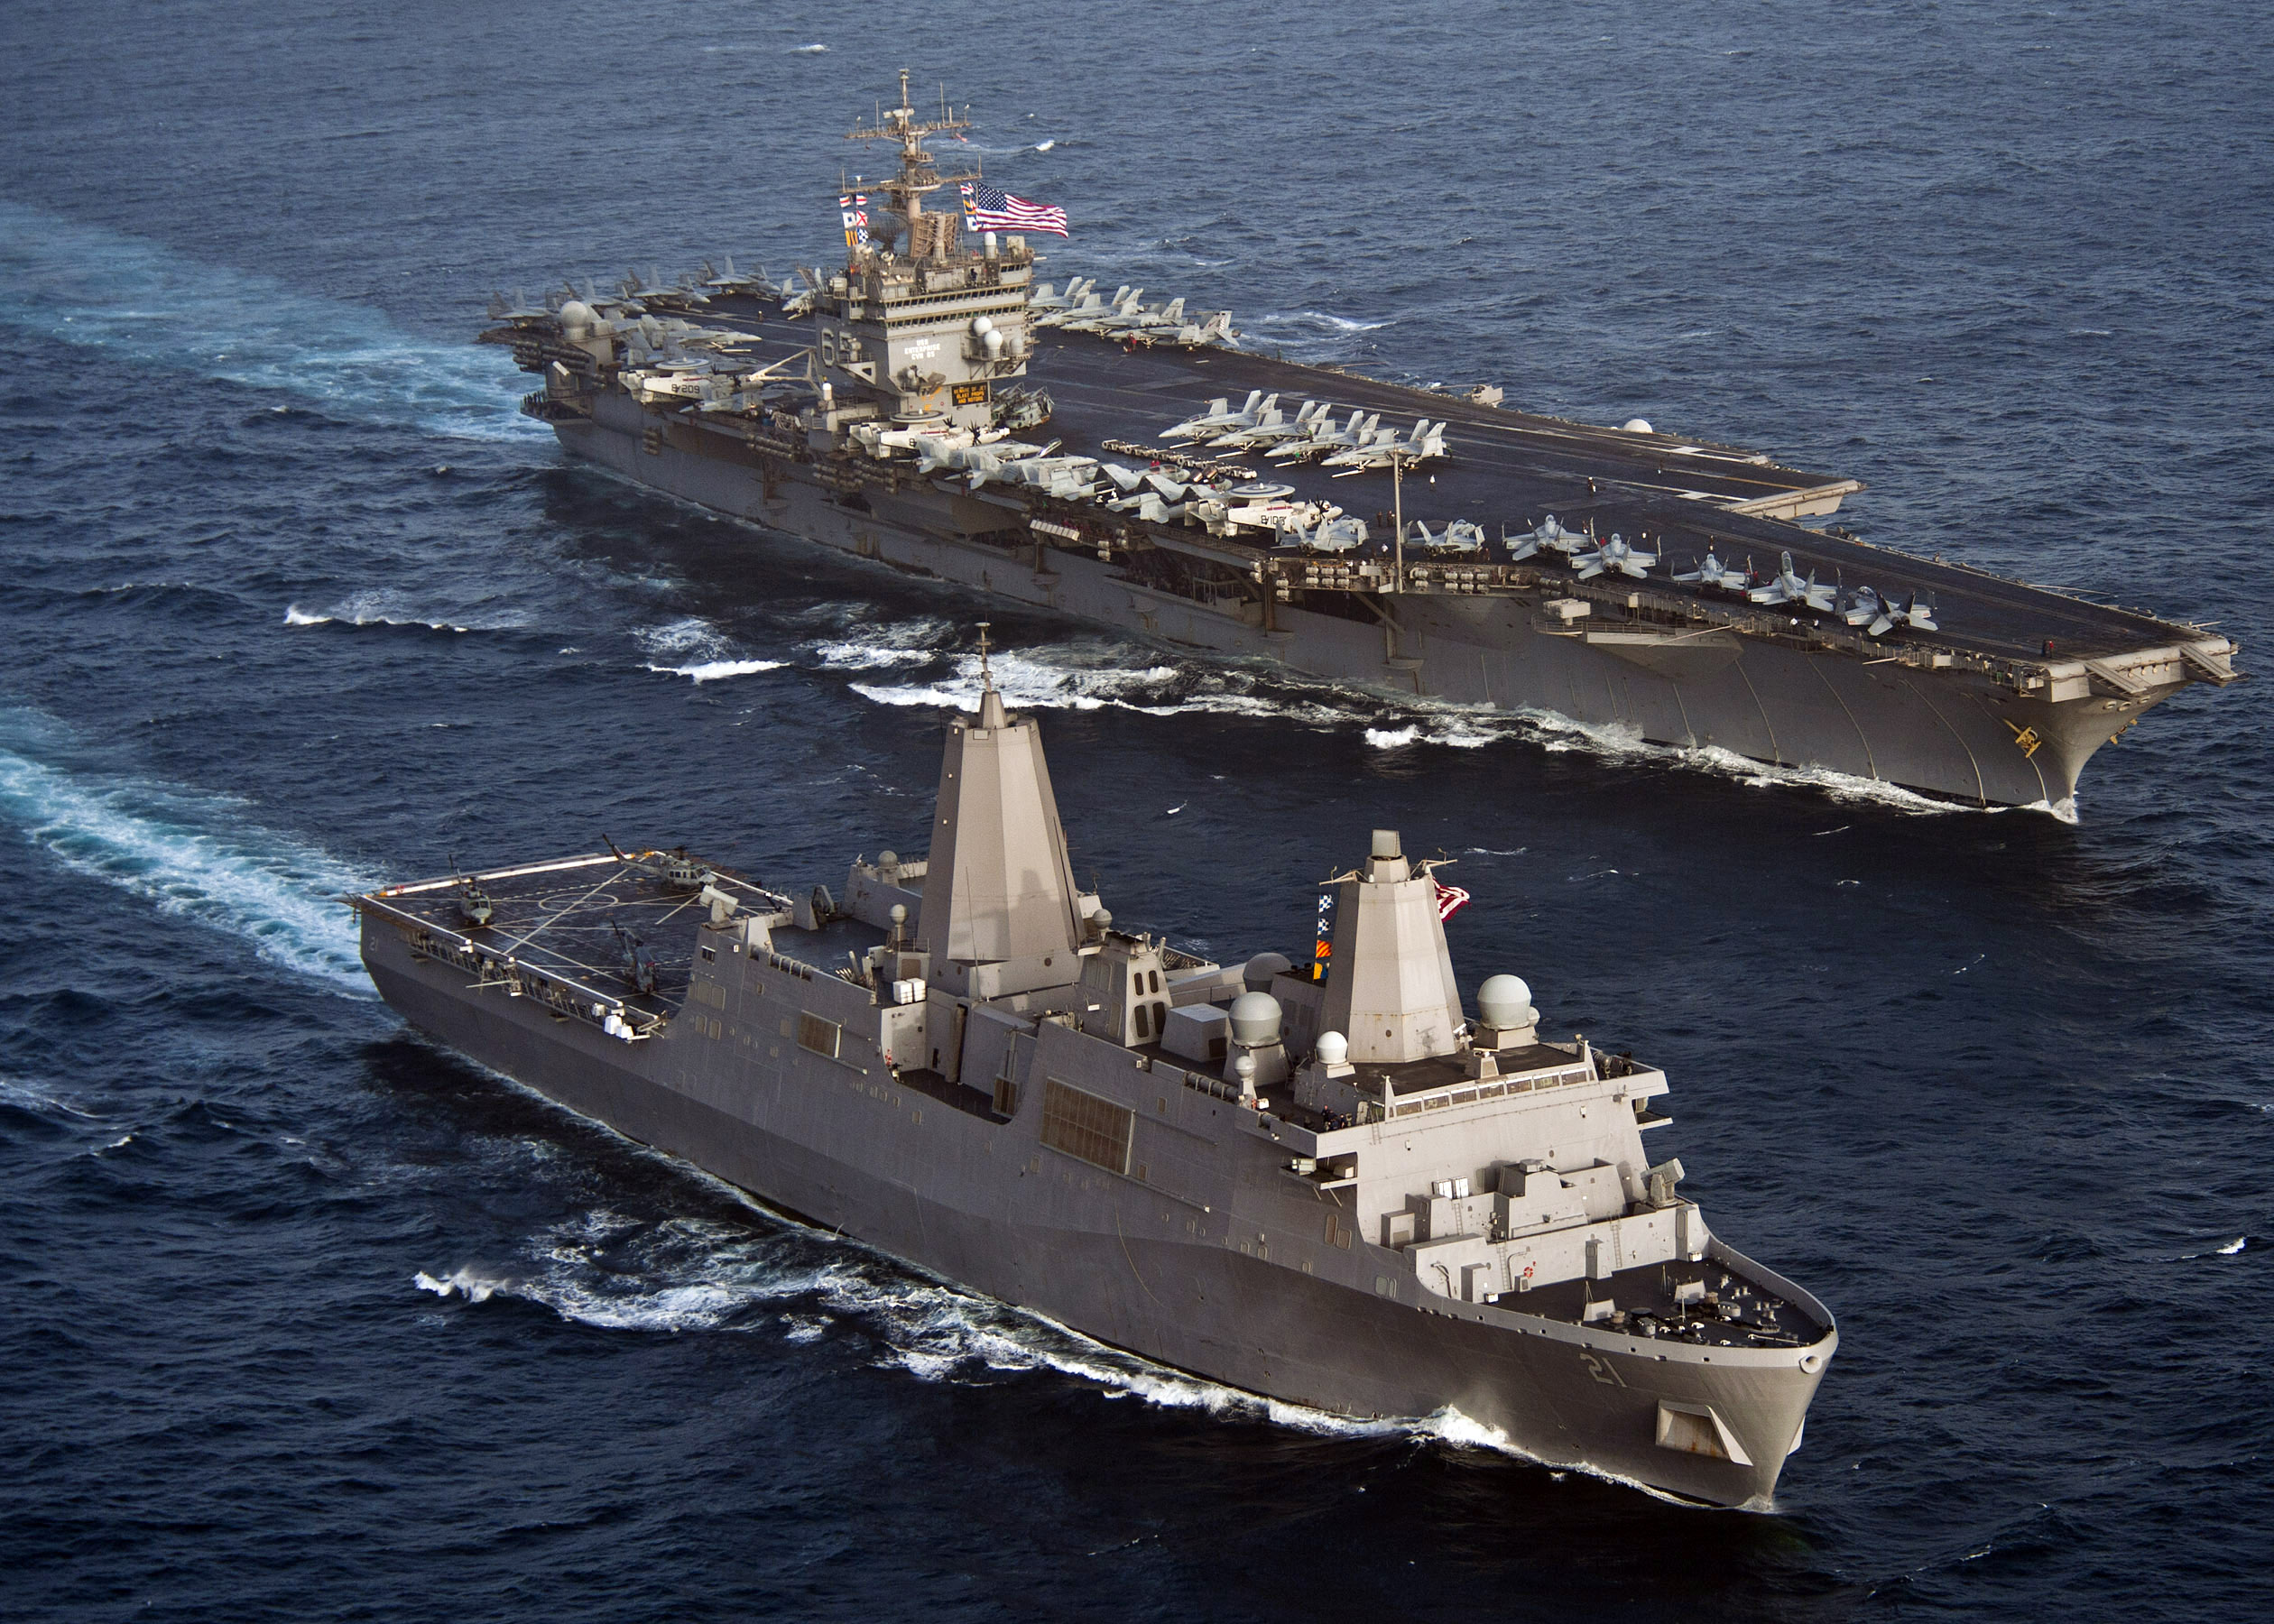 USS New York (LPD 21) and USS Enterprise (CVN 65) are underway together.